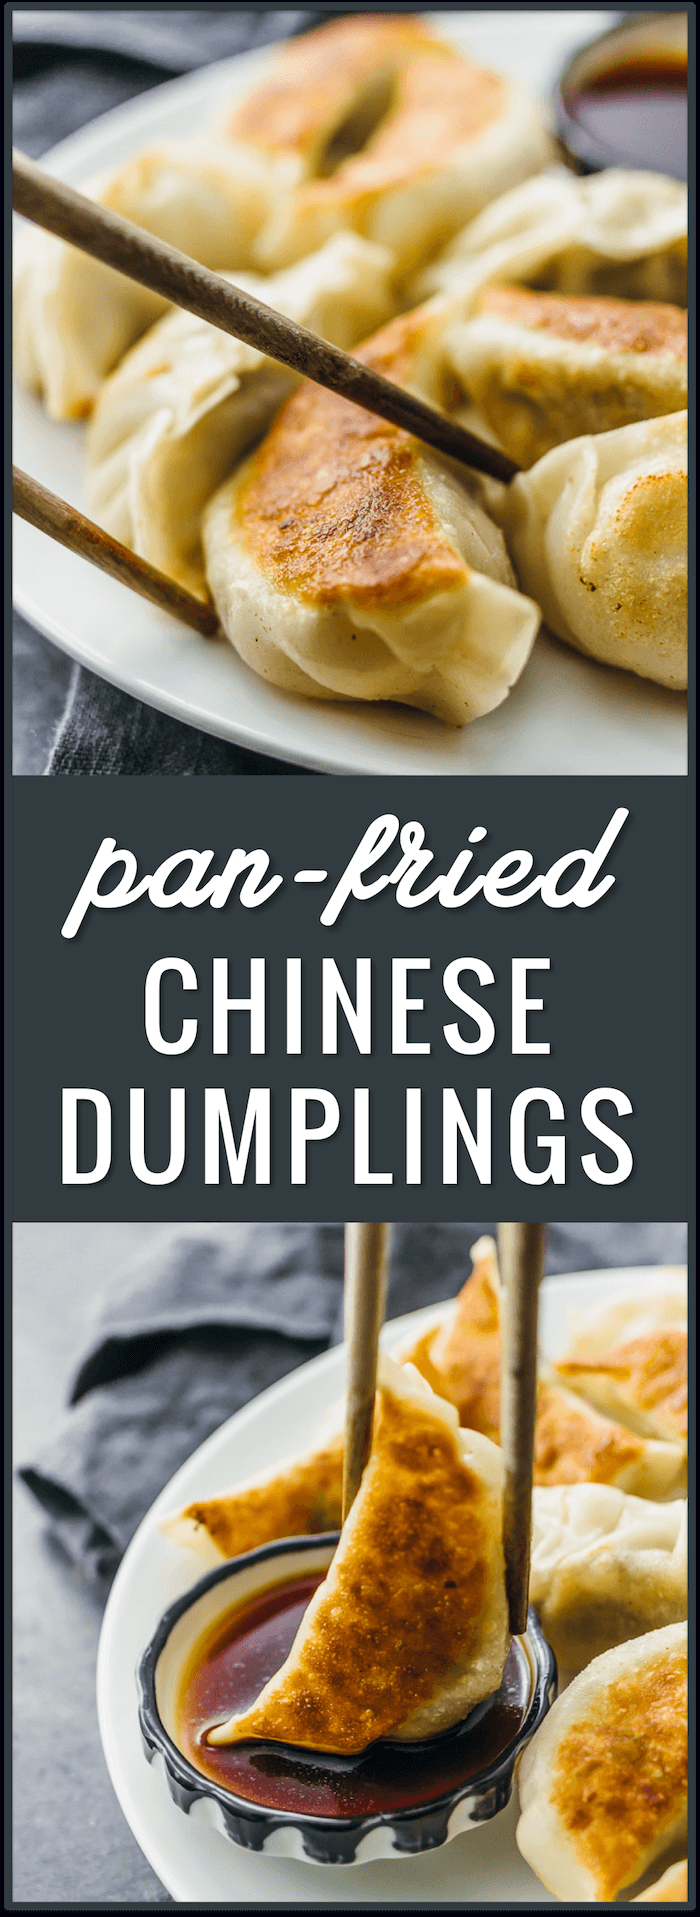 Pan-fried Chinese dumplings recipe, potstickers, pork dumplings, easy dumplings, how to cook dumplings from scratch, beef dumplings, fried, frozen, boil, filling ideas, authentic, homemade, chicken, for soup, asian via @savory_tooth -   24 chinese recipes easy
 ideas